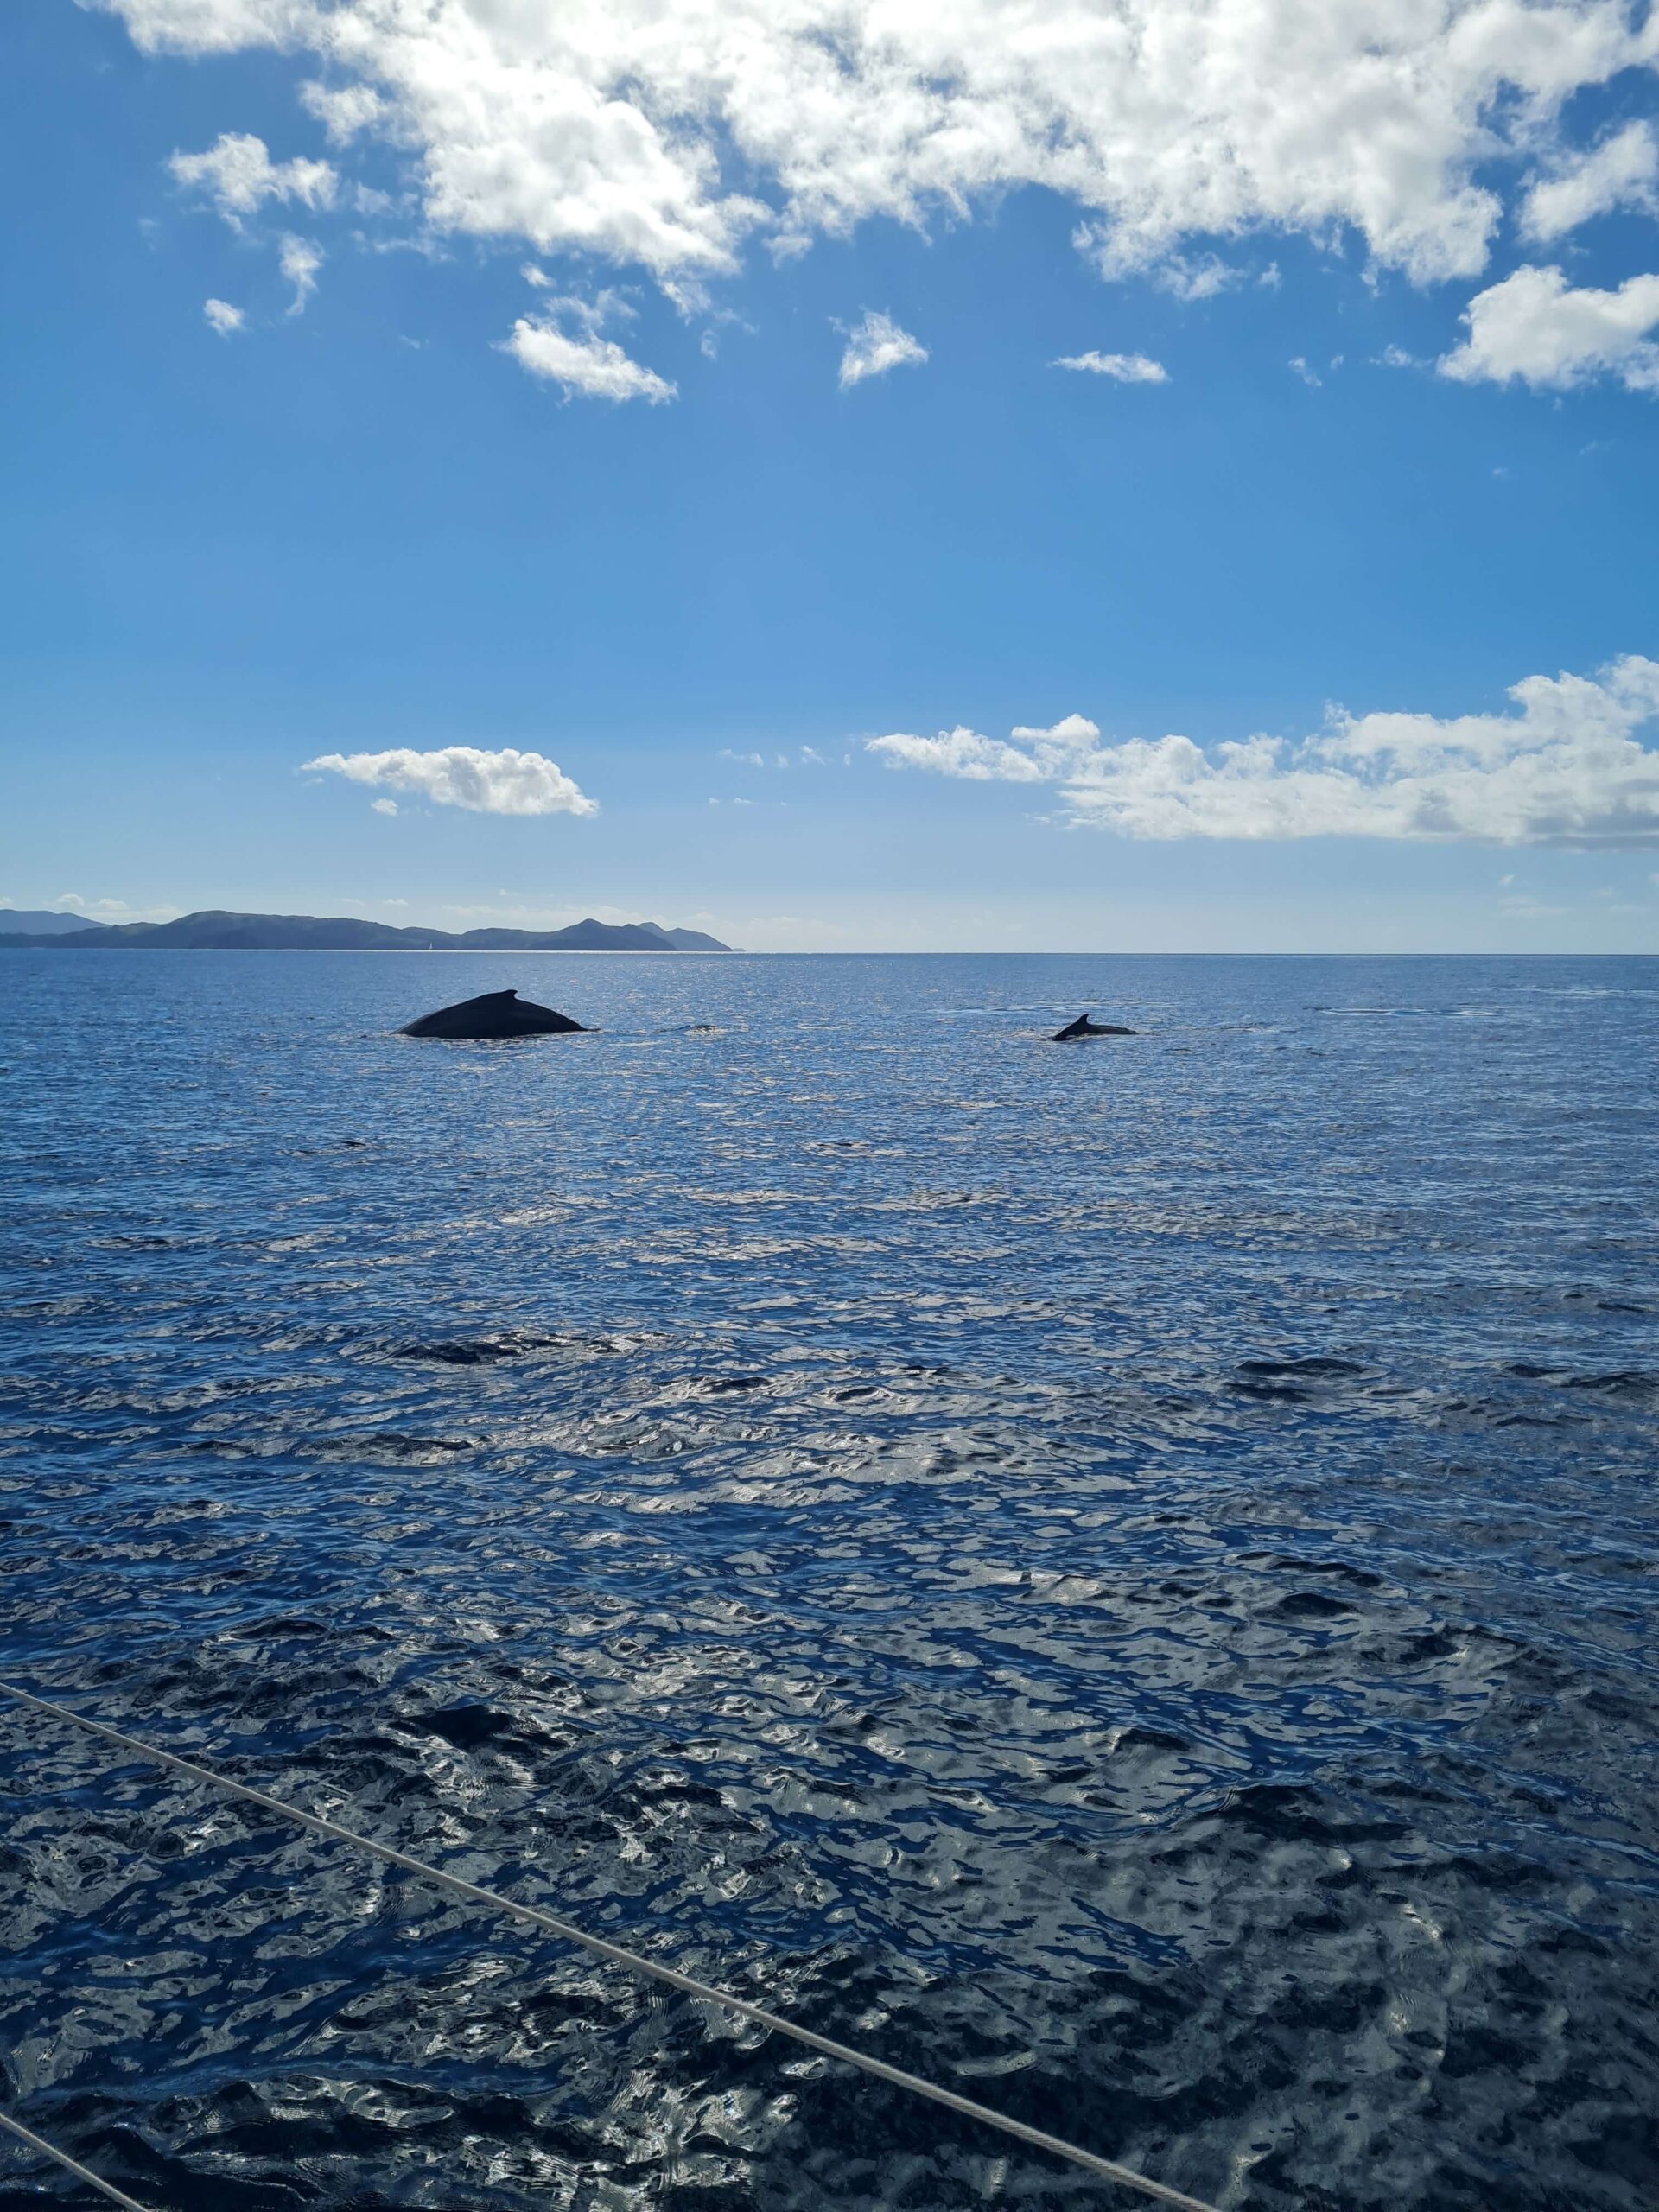 Whales in Cid Harbour, Whitsunday Islands. Photo taken by Sam.